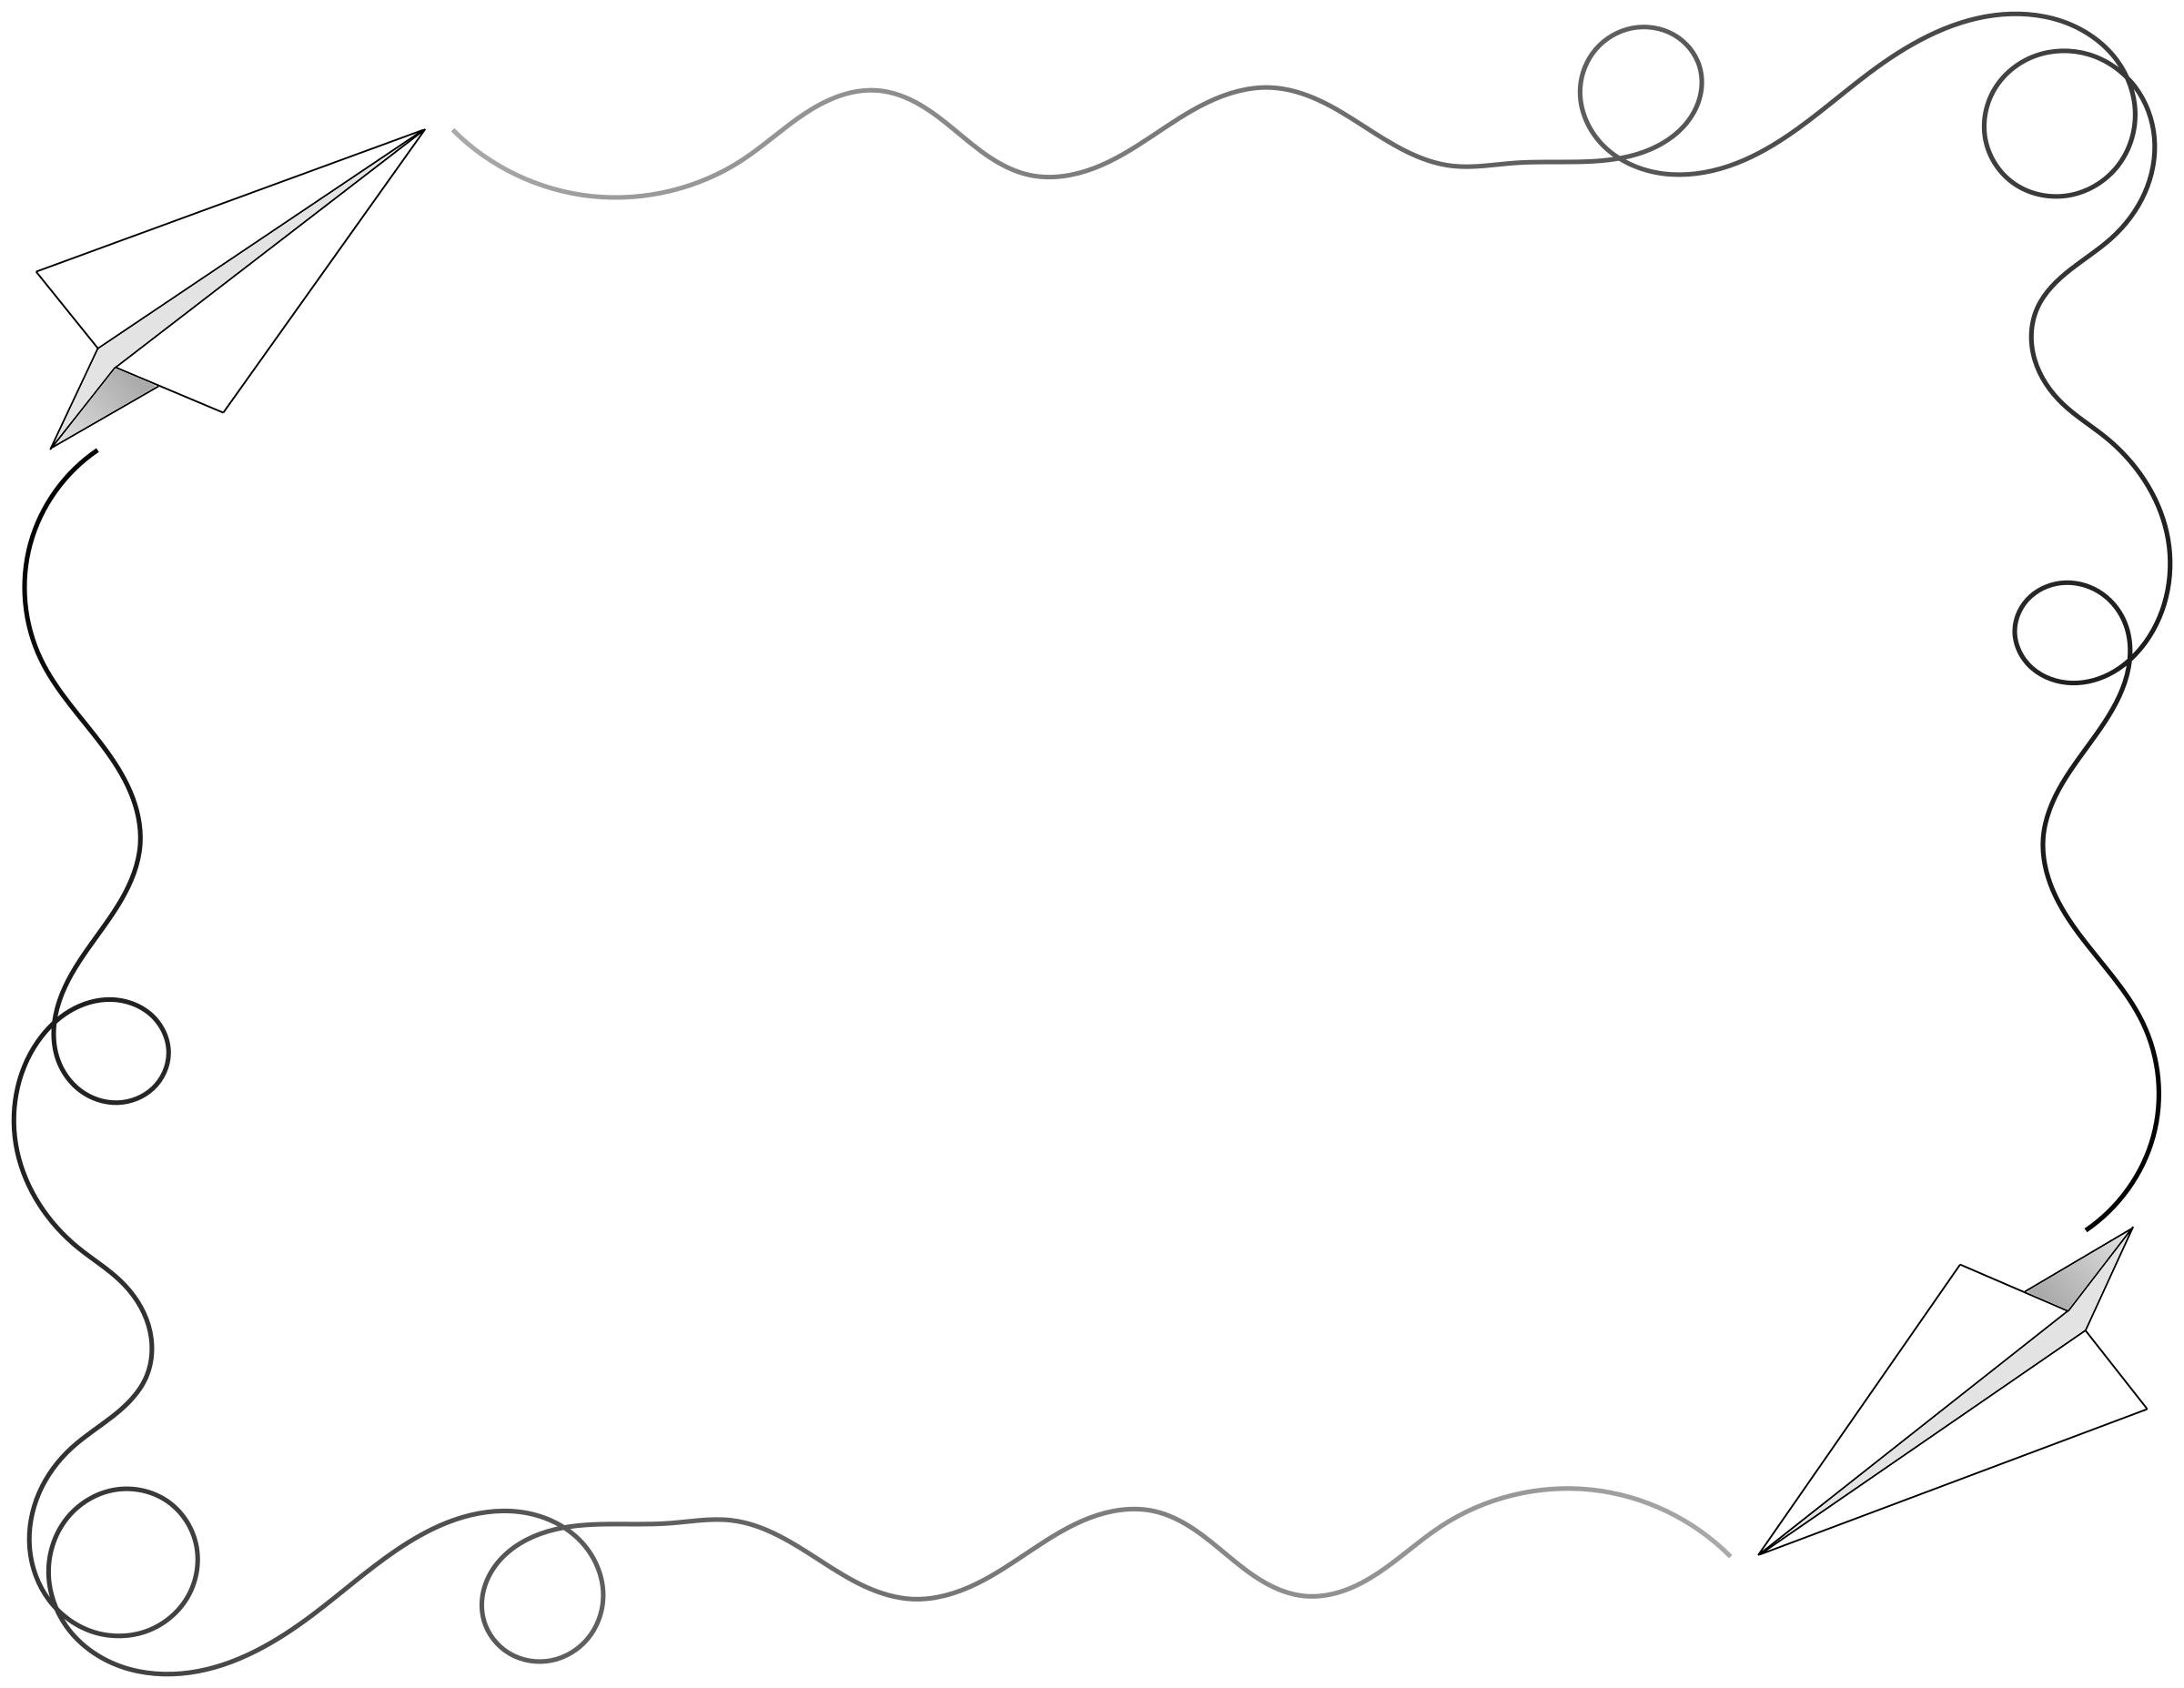 Paper Airplane Border png